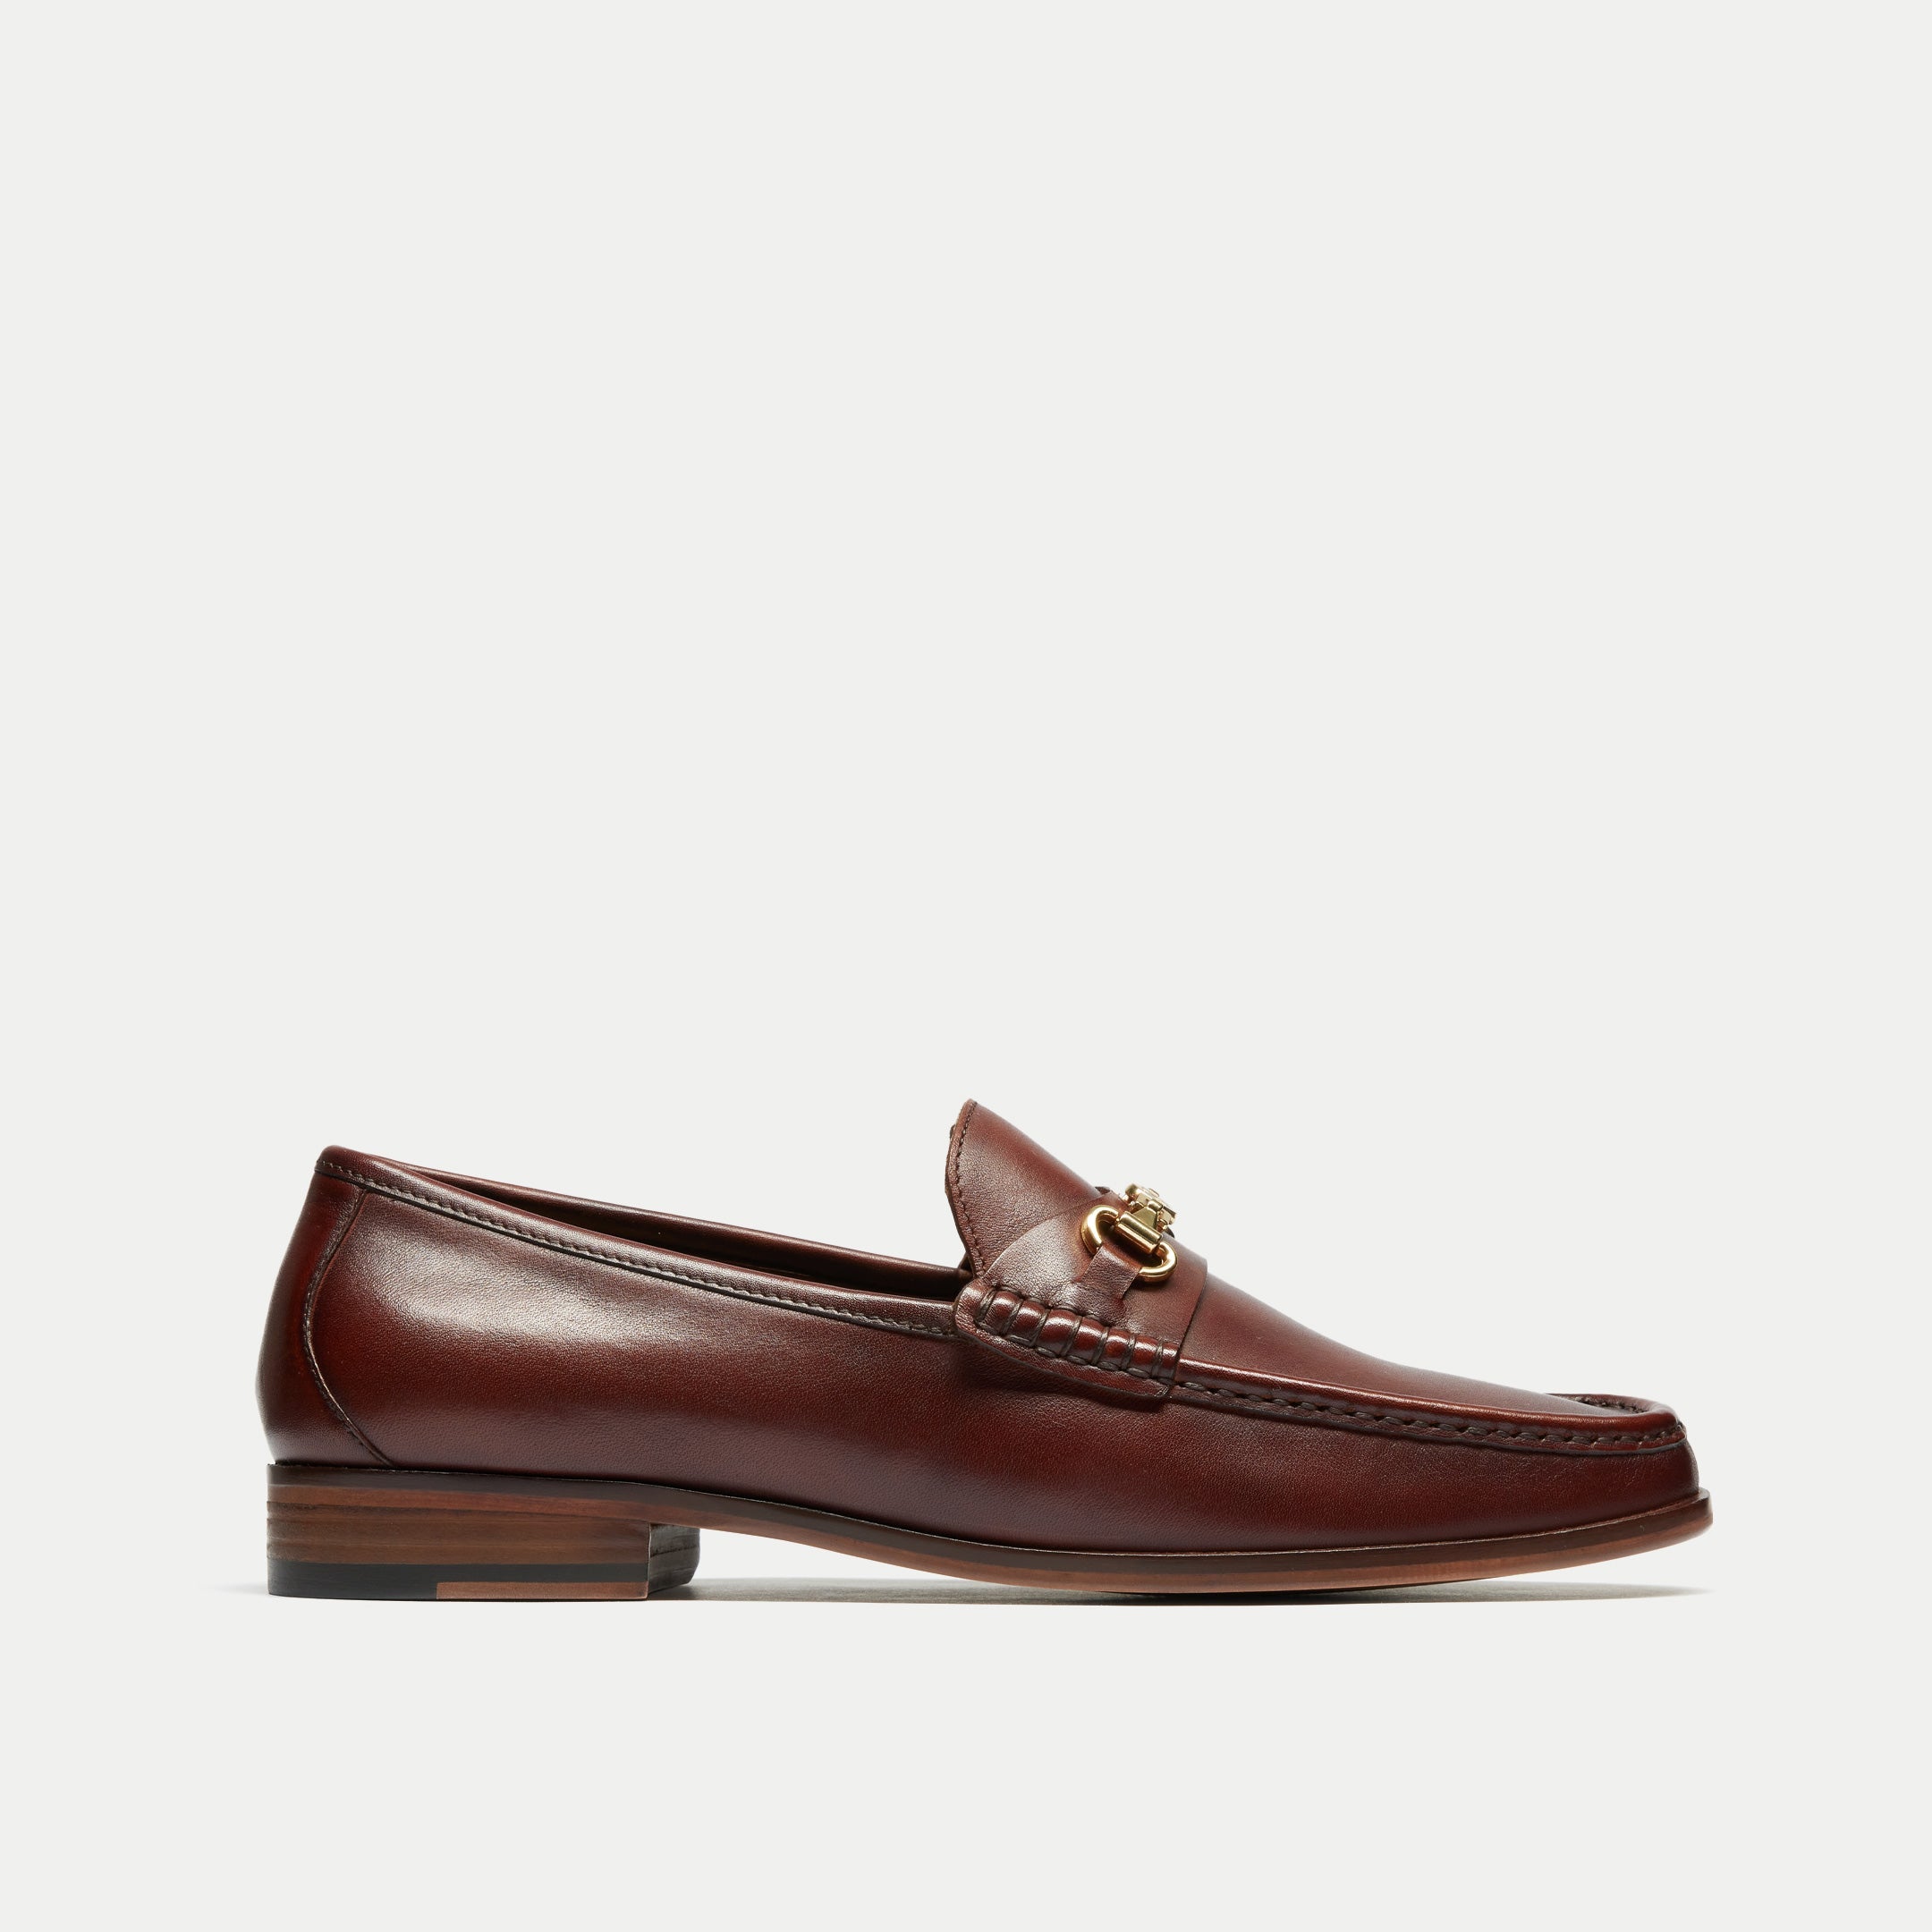 Walk London Mens Tino Trim Loafer in Brown Leather